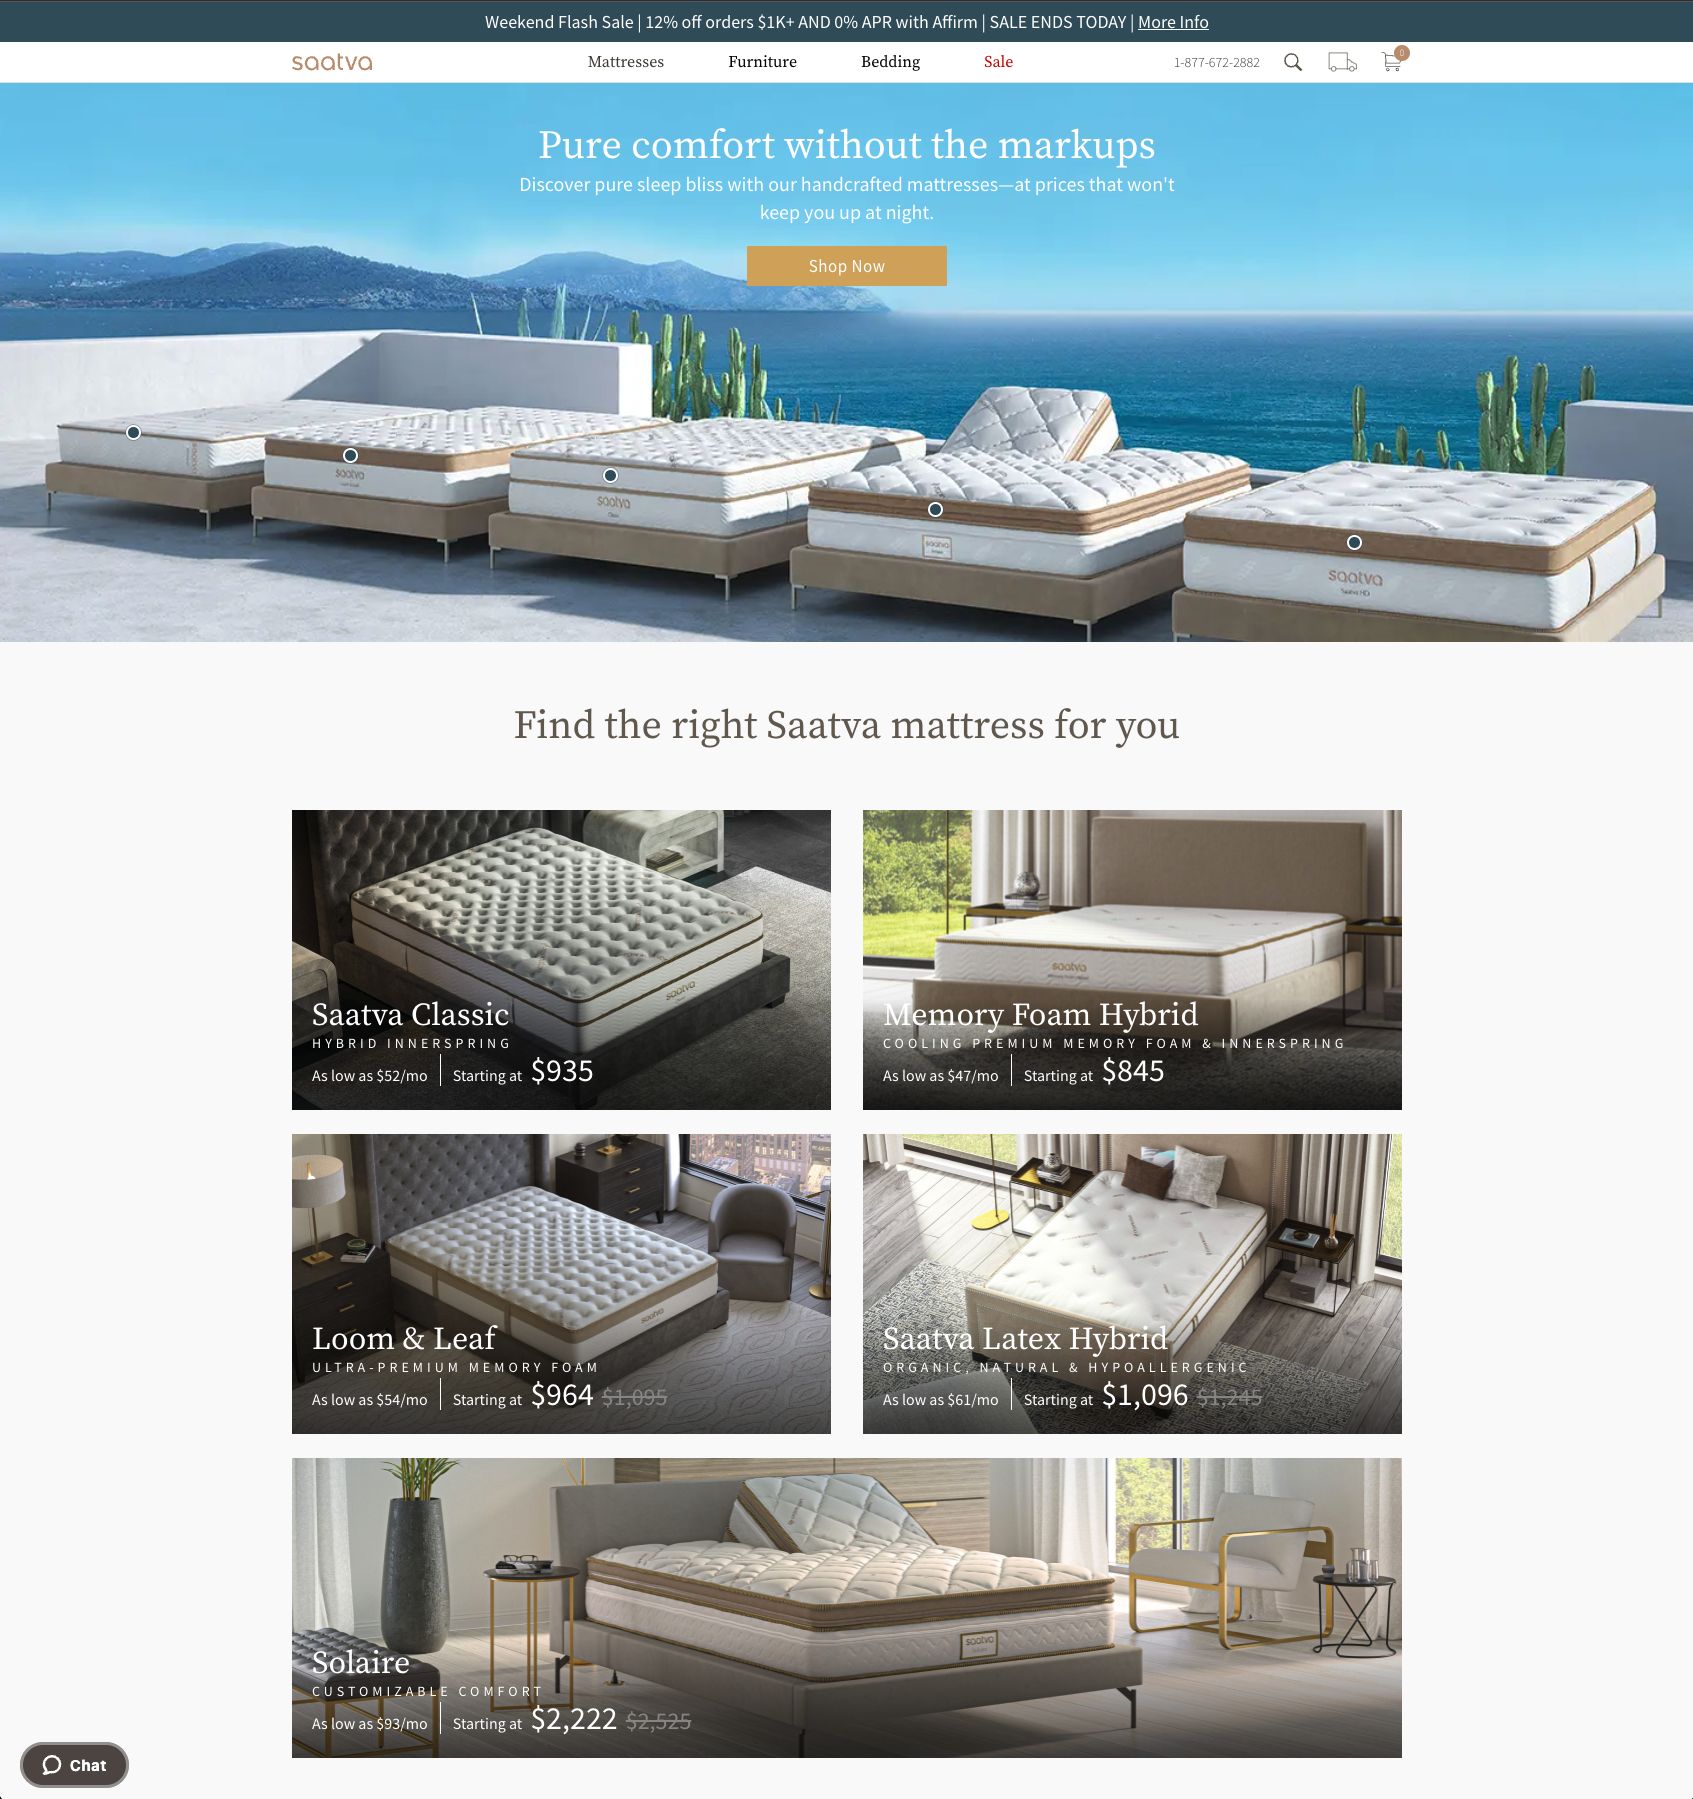 The homepage of the Saatva's website, showcasing its made-to-order, handcrafted mattresses.